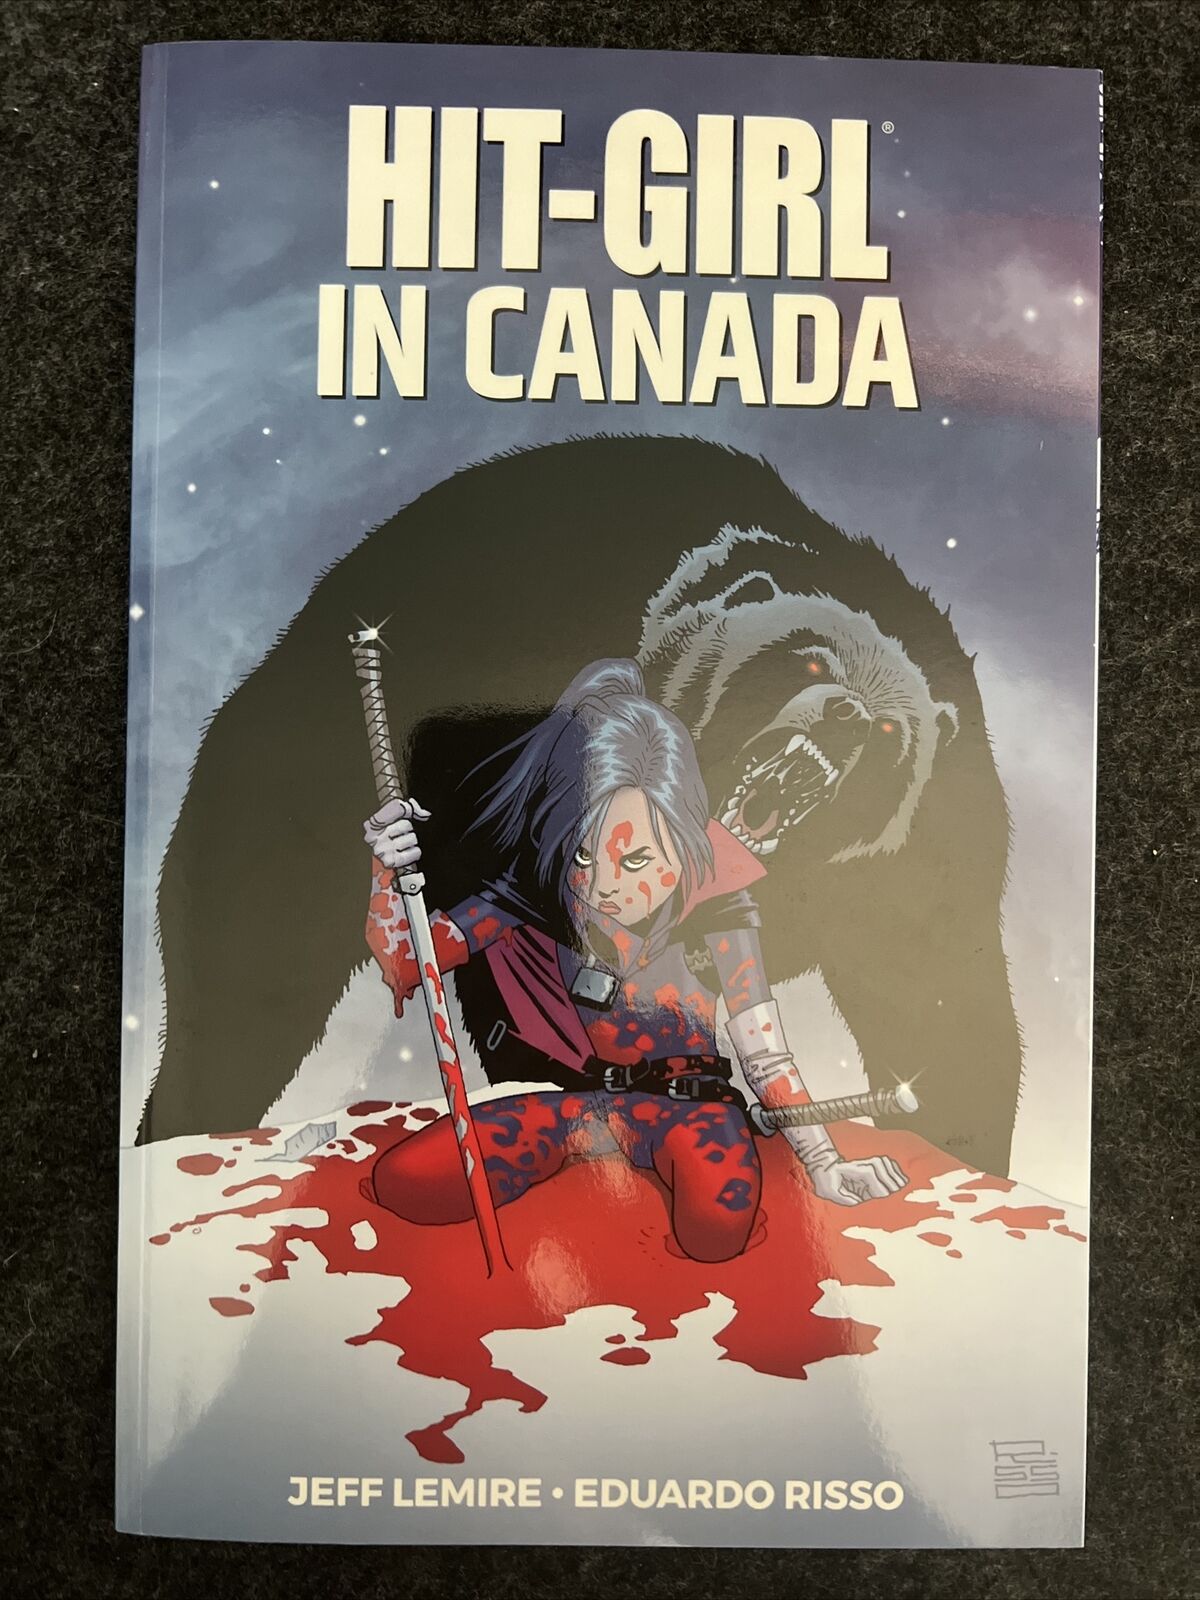 Hit-Girl #2 In Canada by Jeff Lemire (Image 2018 Trade Paperback) KICK ASS NEW